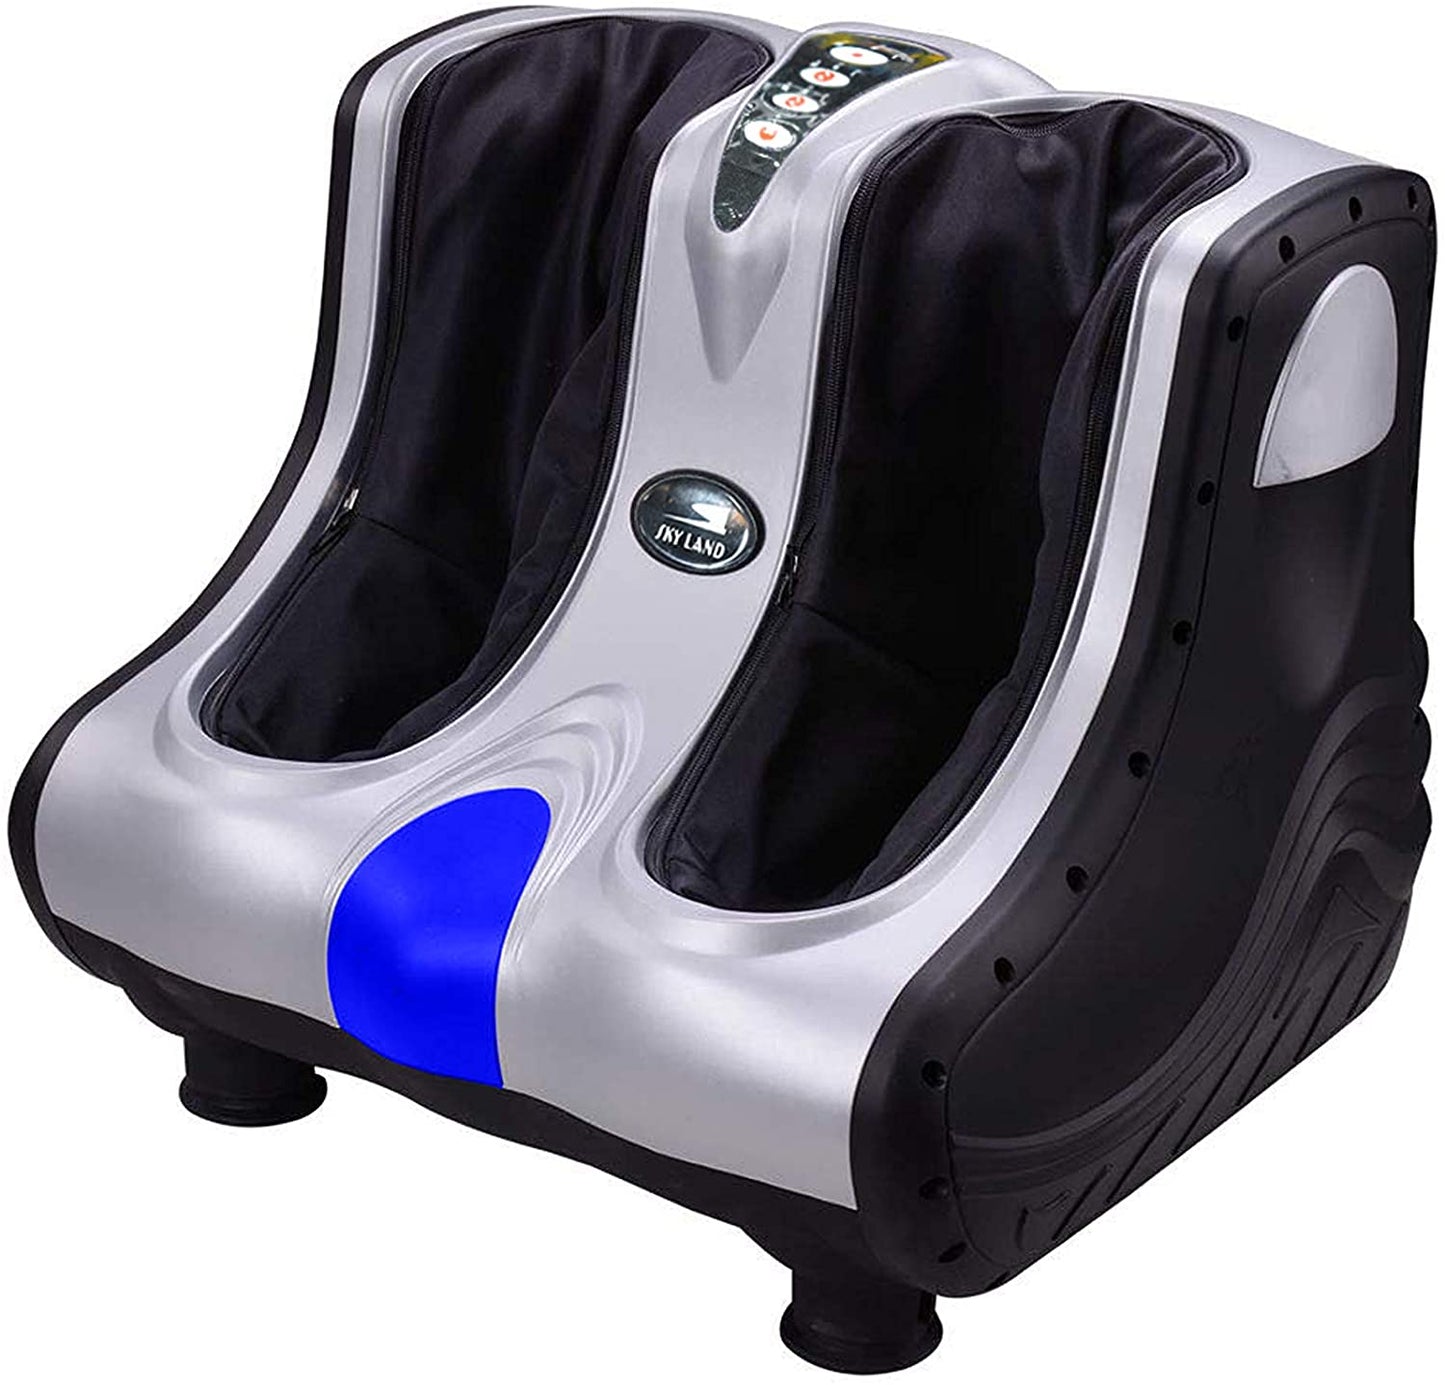 COOLBABY Foot & Calf Massager - Premium Quality, Stress Relief, and Improved Circulation - COOLBABY